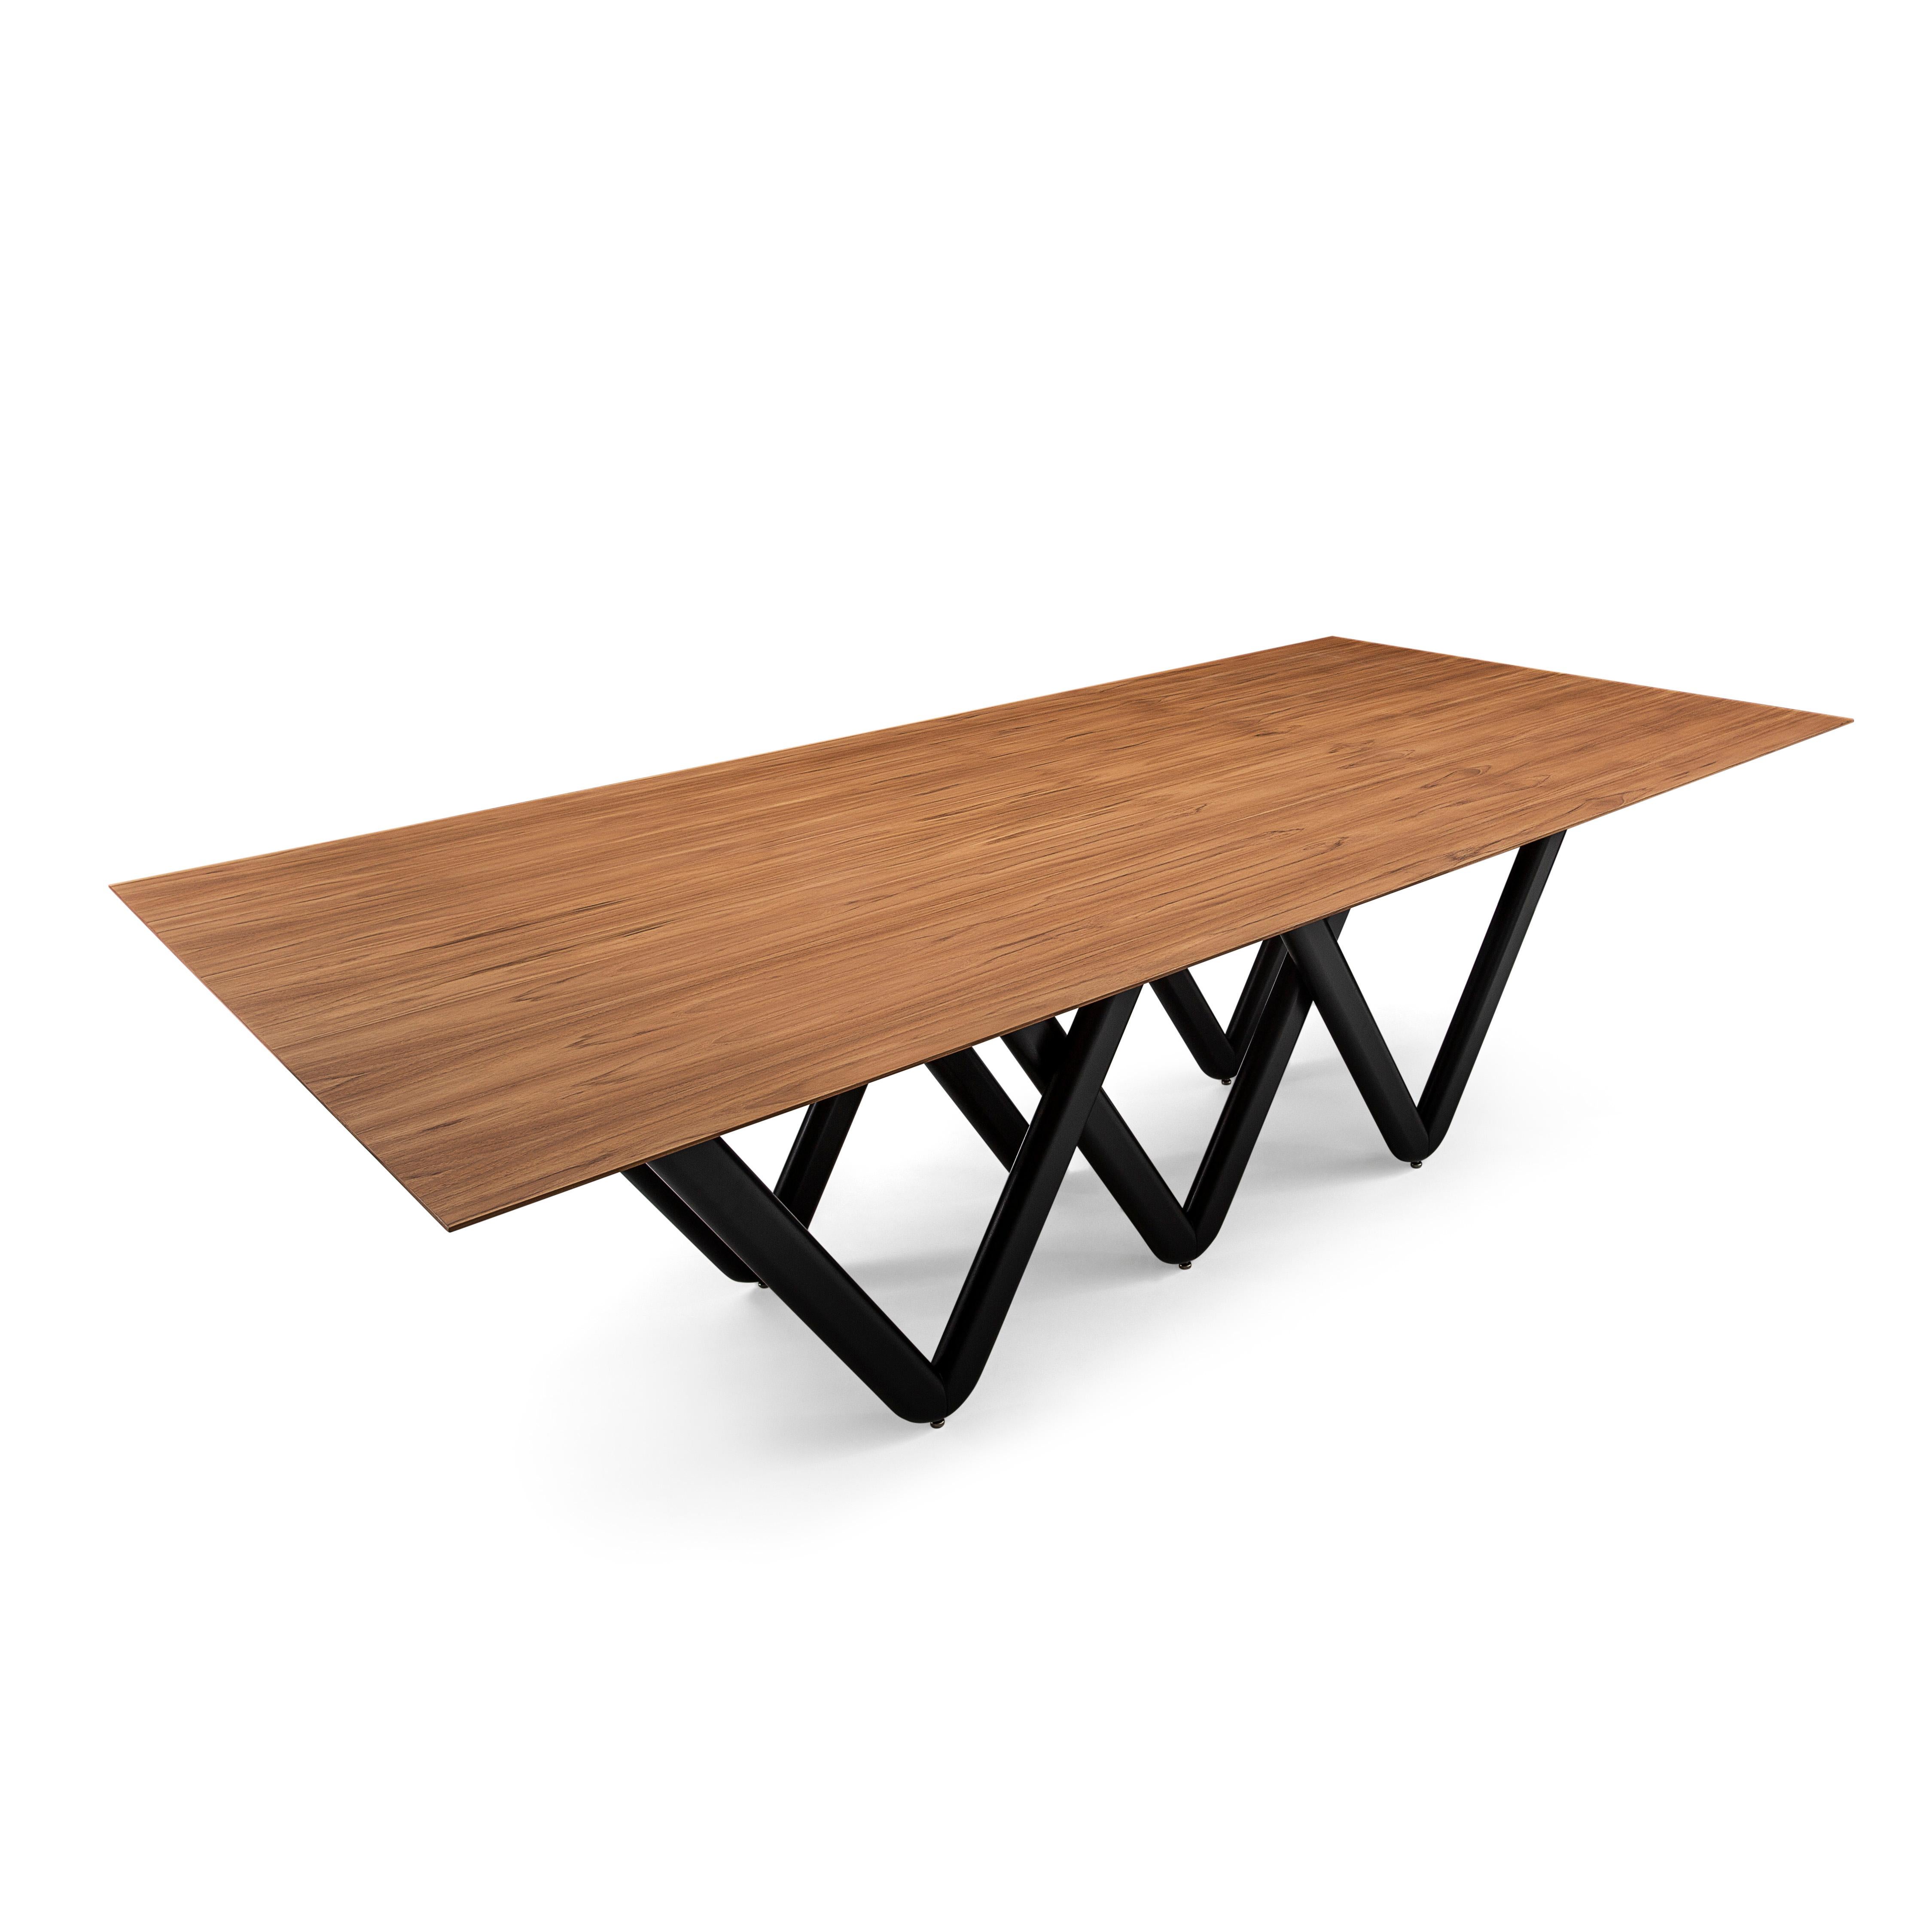 Brazilian Dablio Dining Table with a Teak Wood Veneered Table Top and Black Base 98'' For Sale